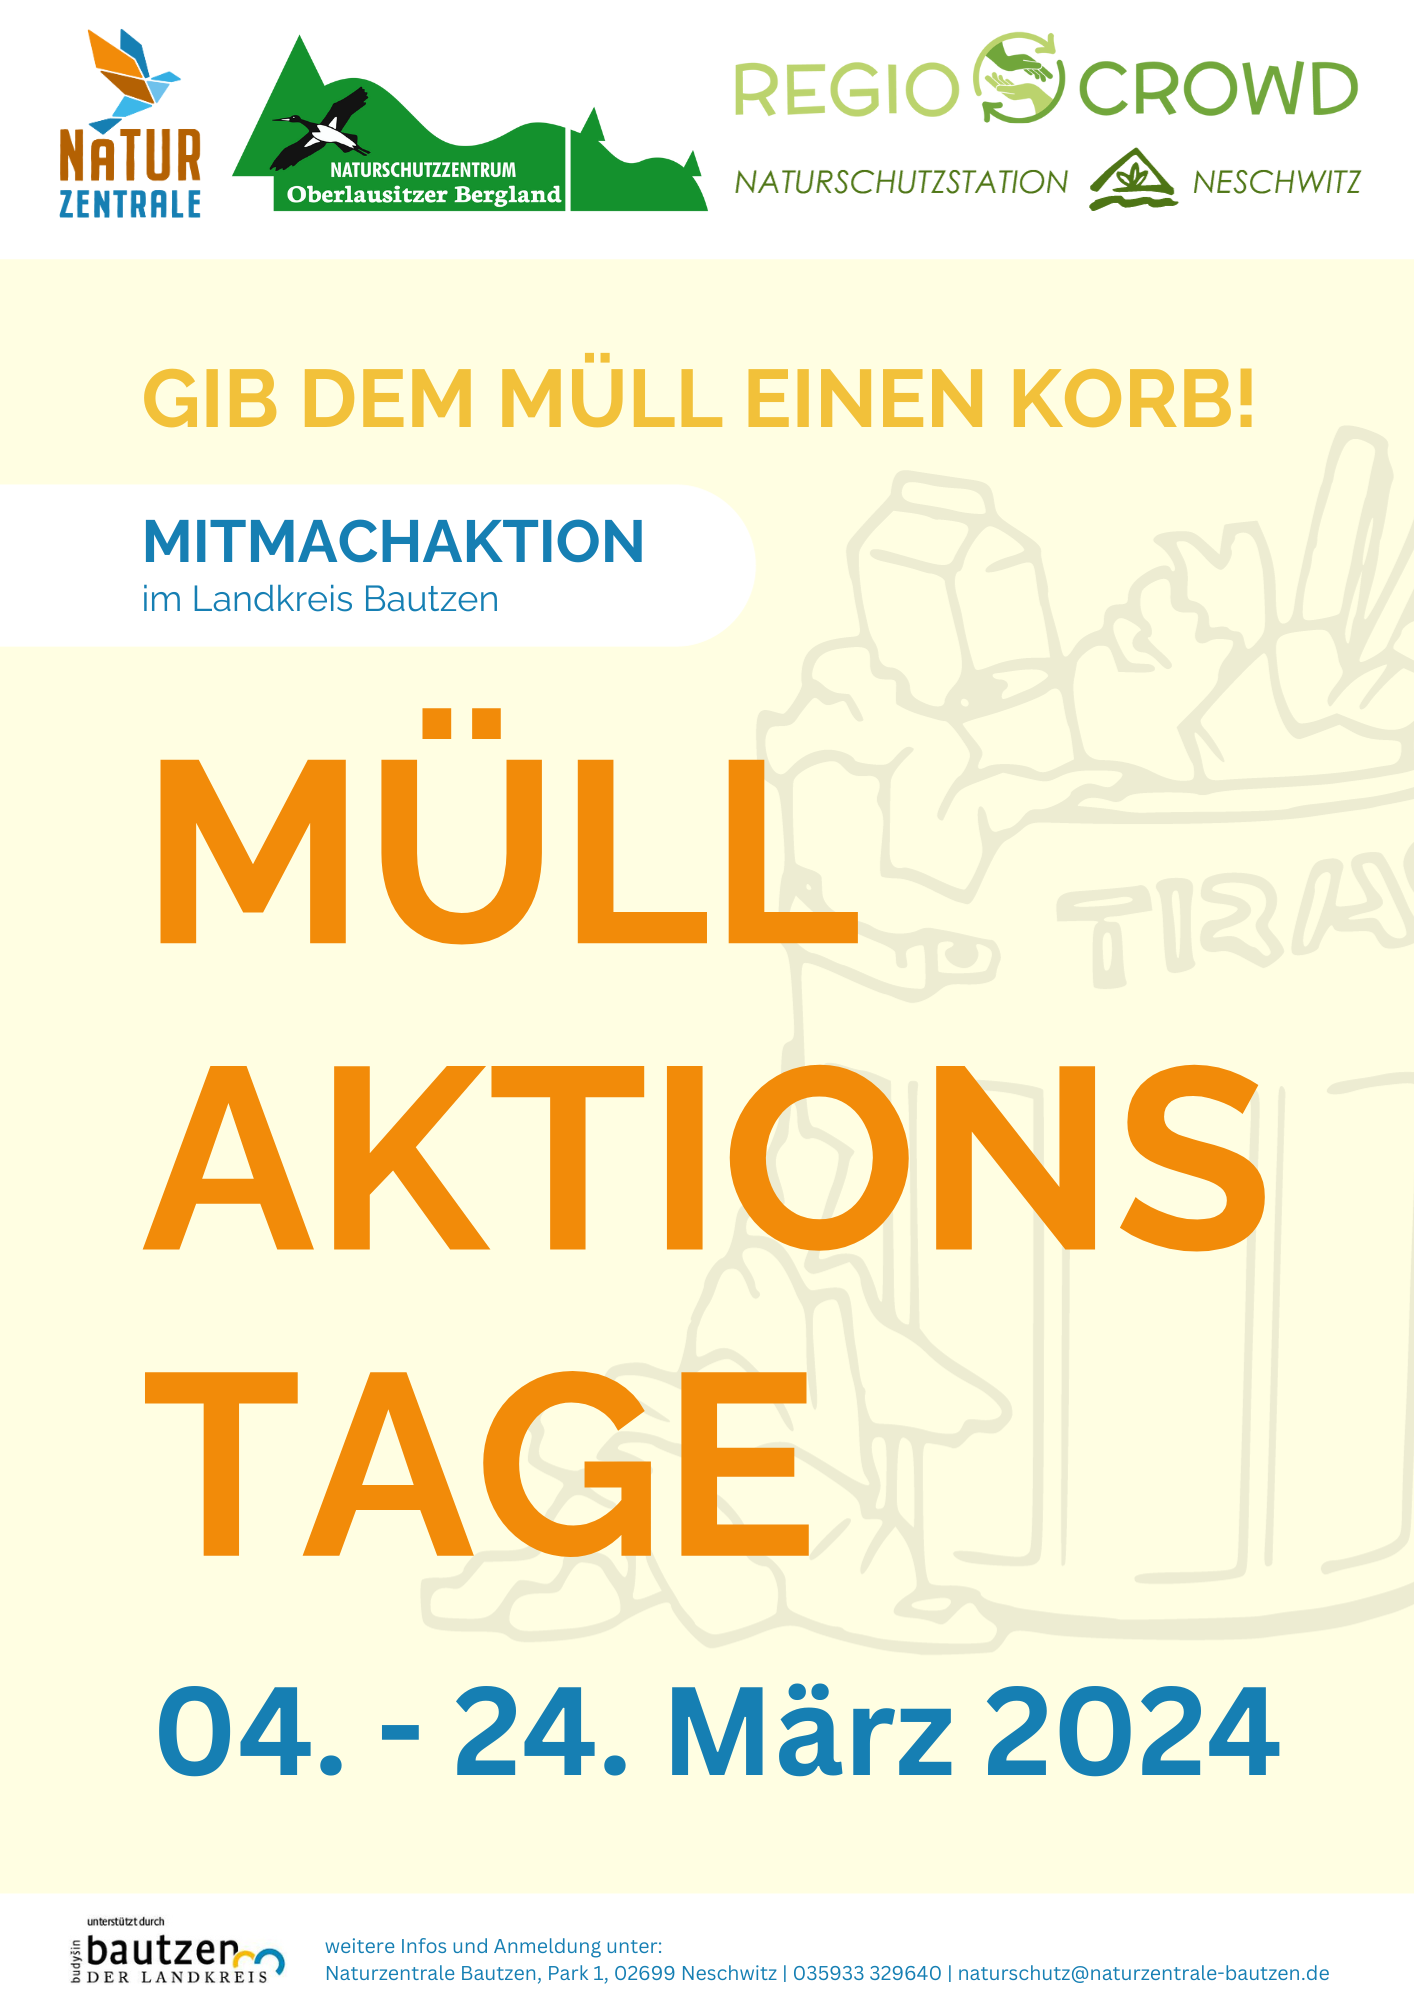 Muell aktionstage 2